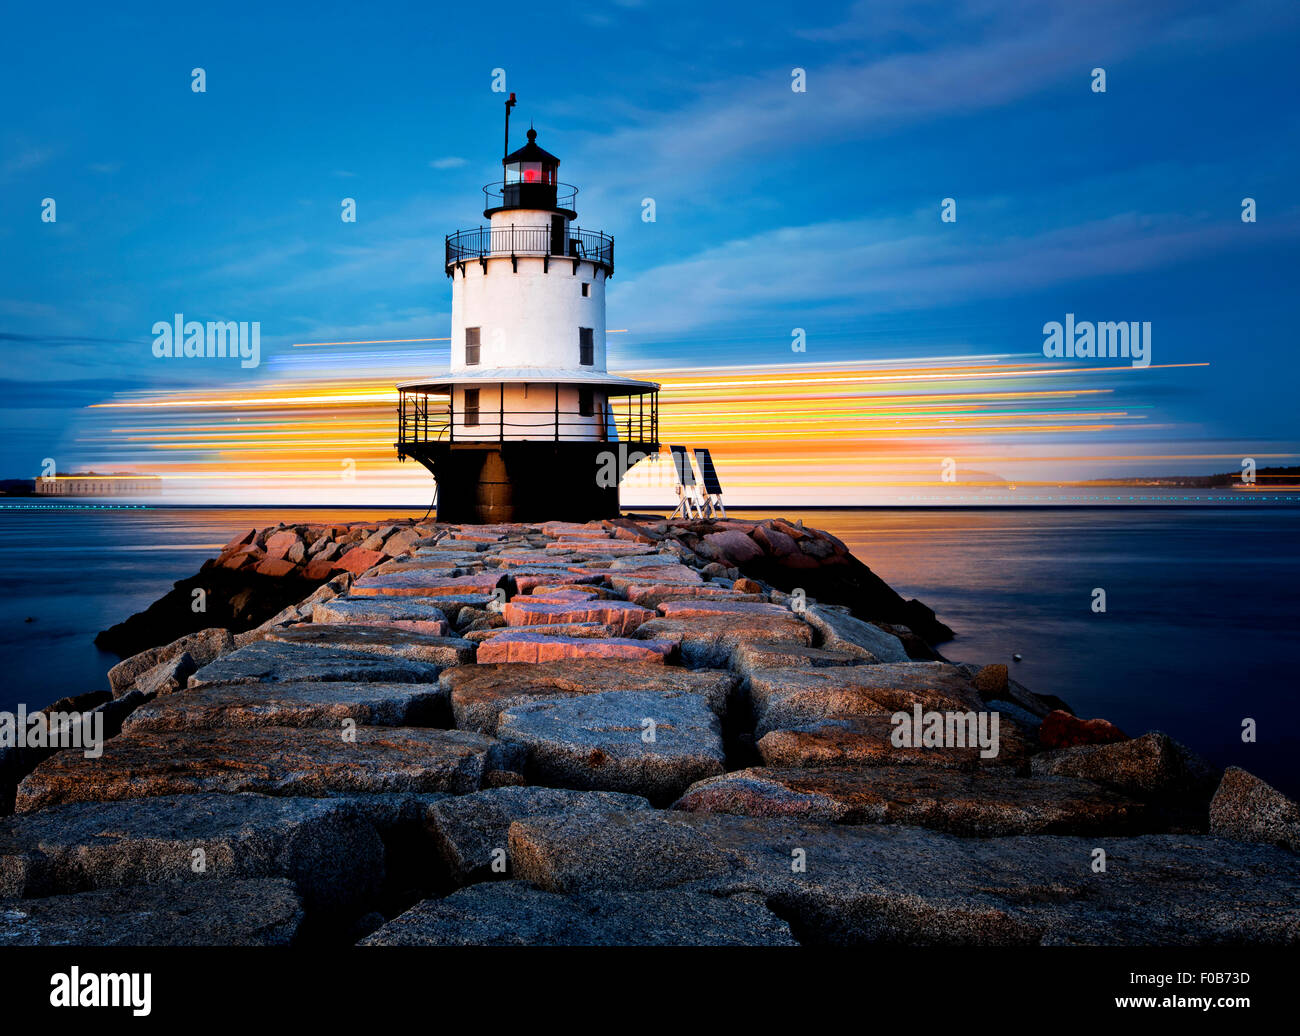 Lighthouse on top of a rocky island slow exposure Stock Photo